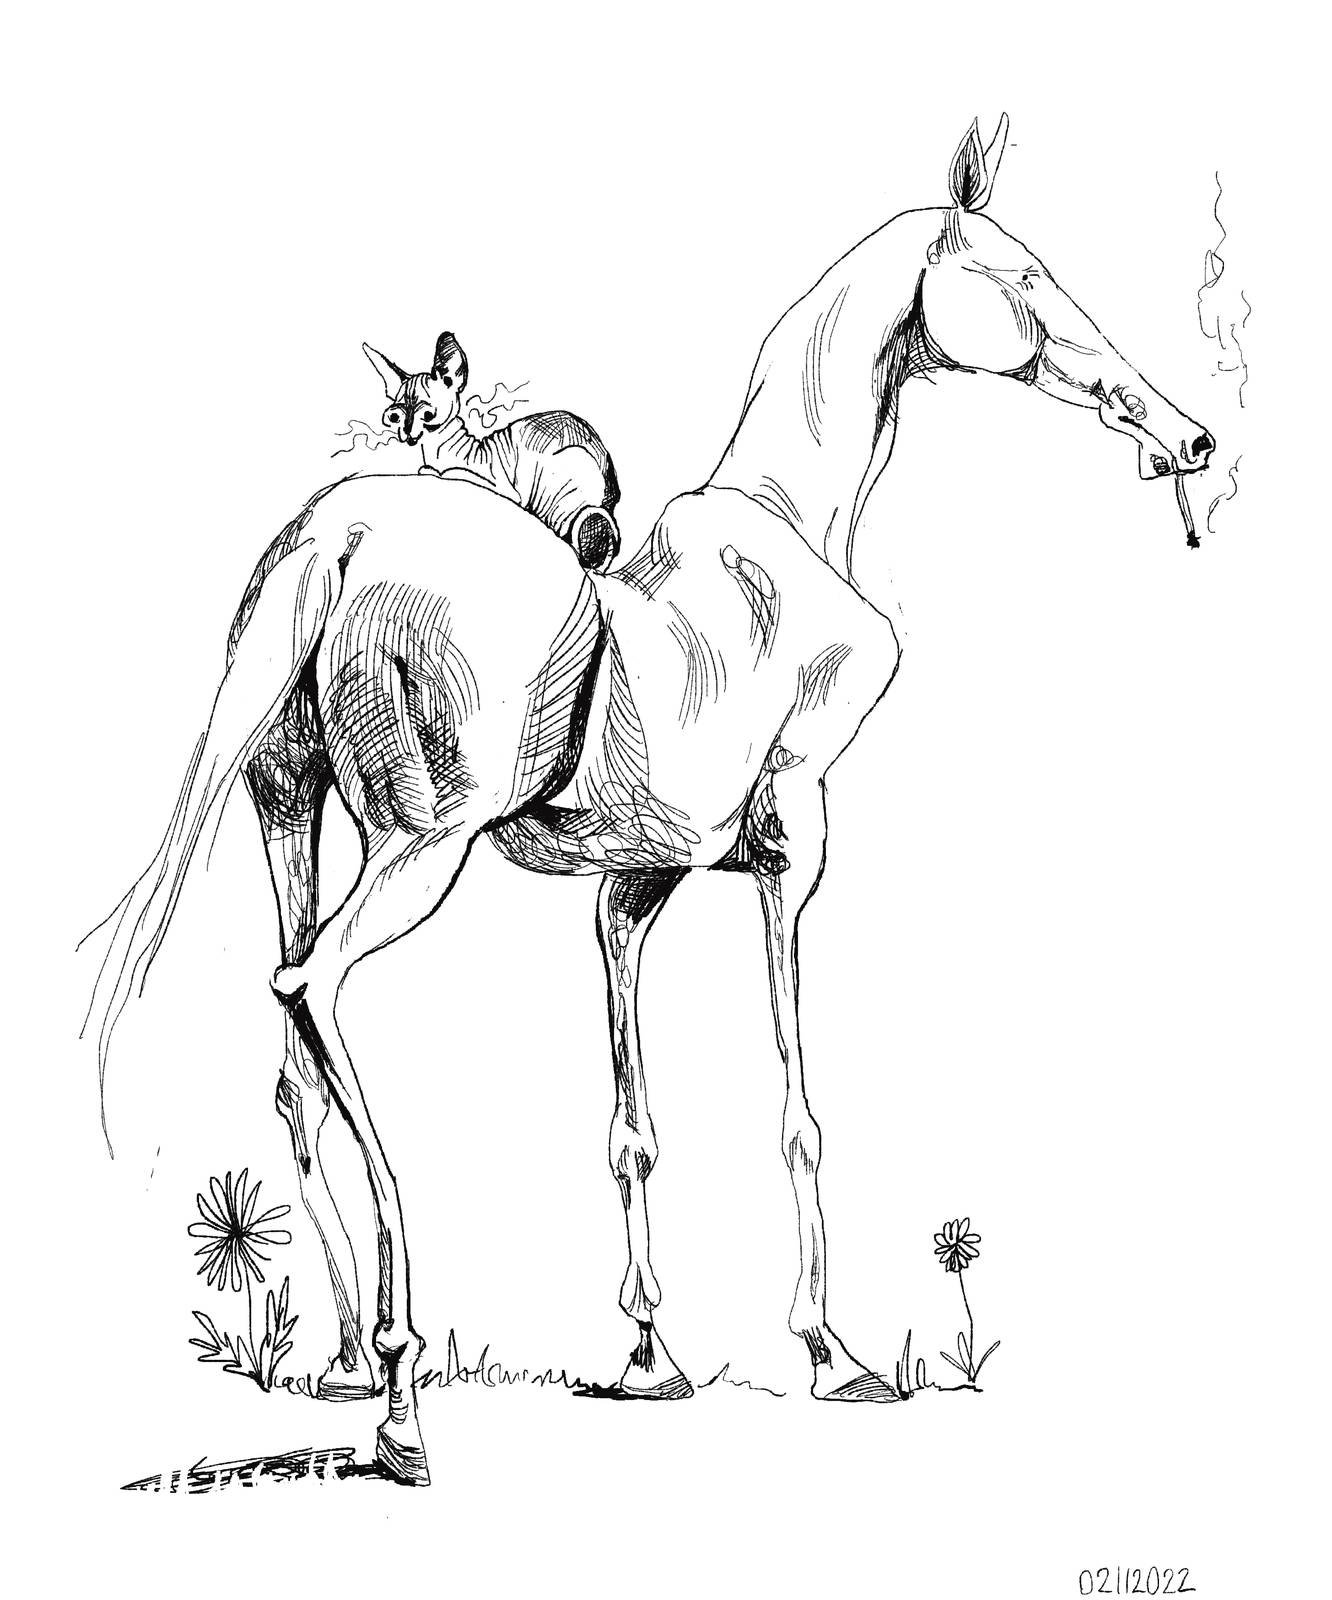 Line drawing of a horse with no mane, an akhal teke, the nudists of horses. It is facing away from the viewer, having a smoke. On its back, a dark sphynx cat with crumpled and curly whiskers loafs. They are the nudist club, and they are on a day trip